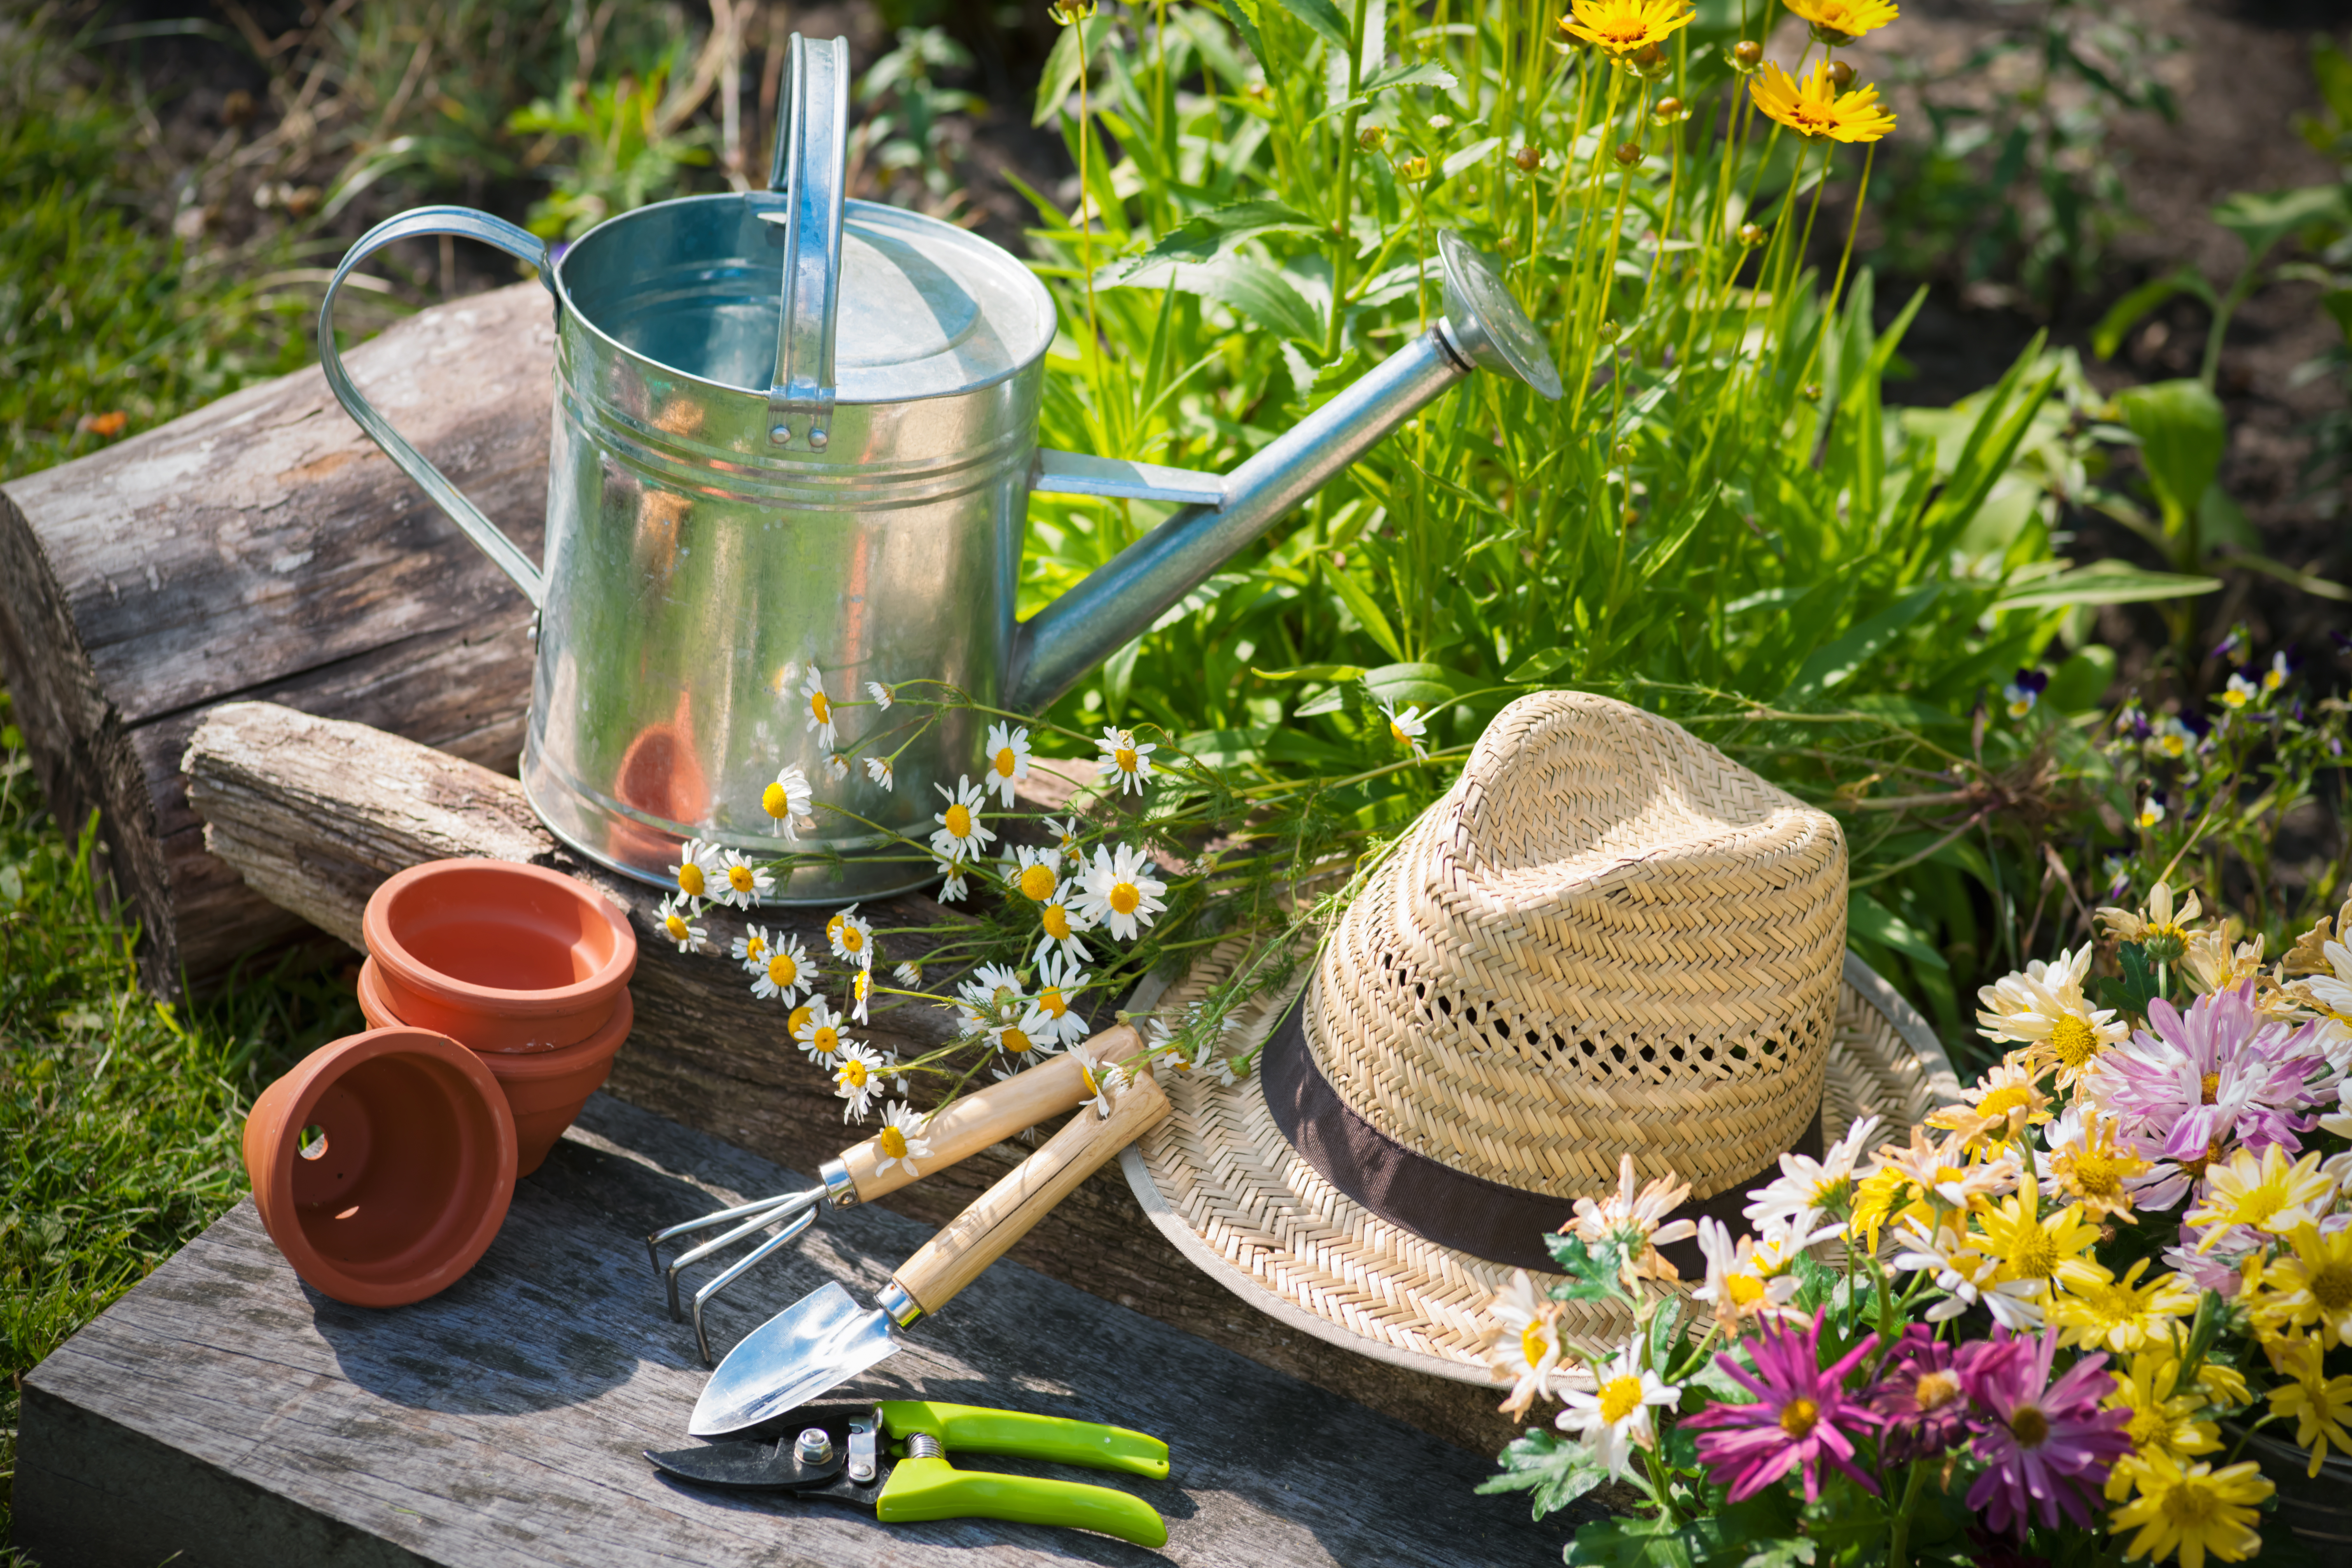 Gardening tools and straw hat in the garden.